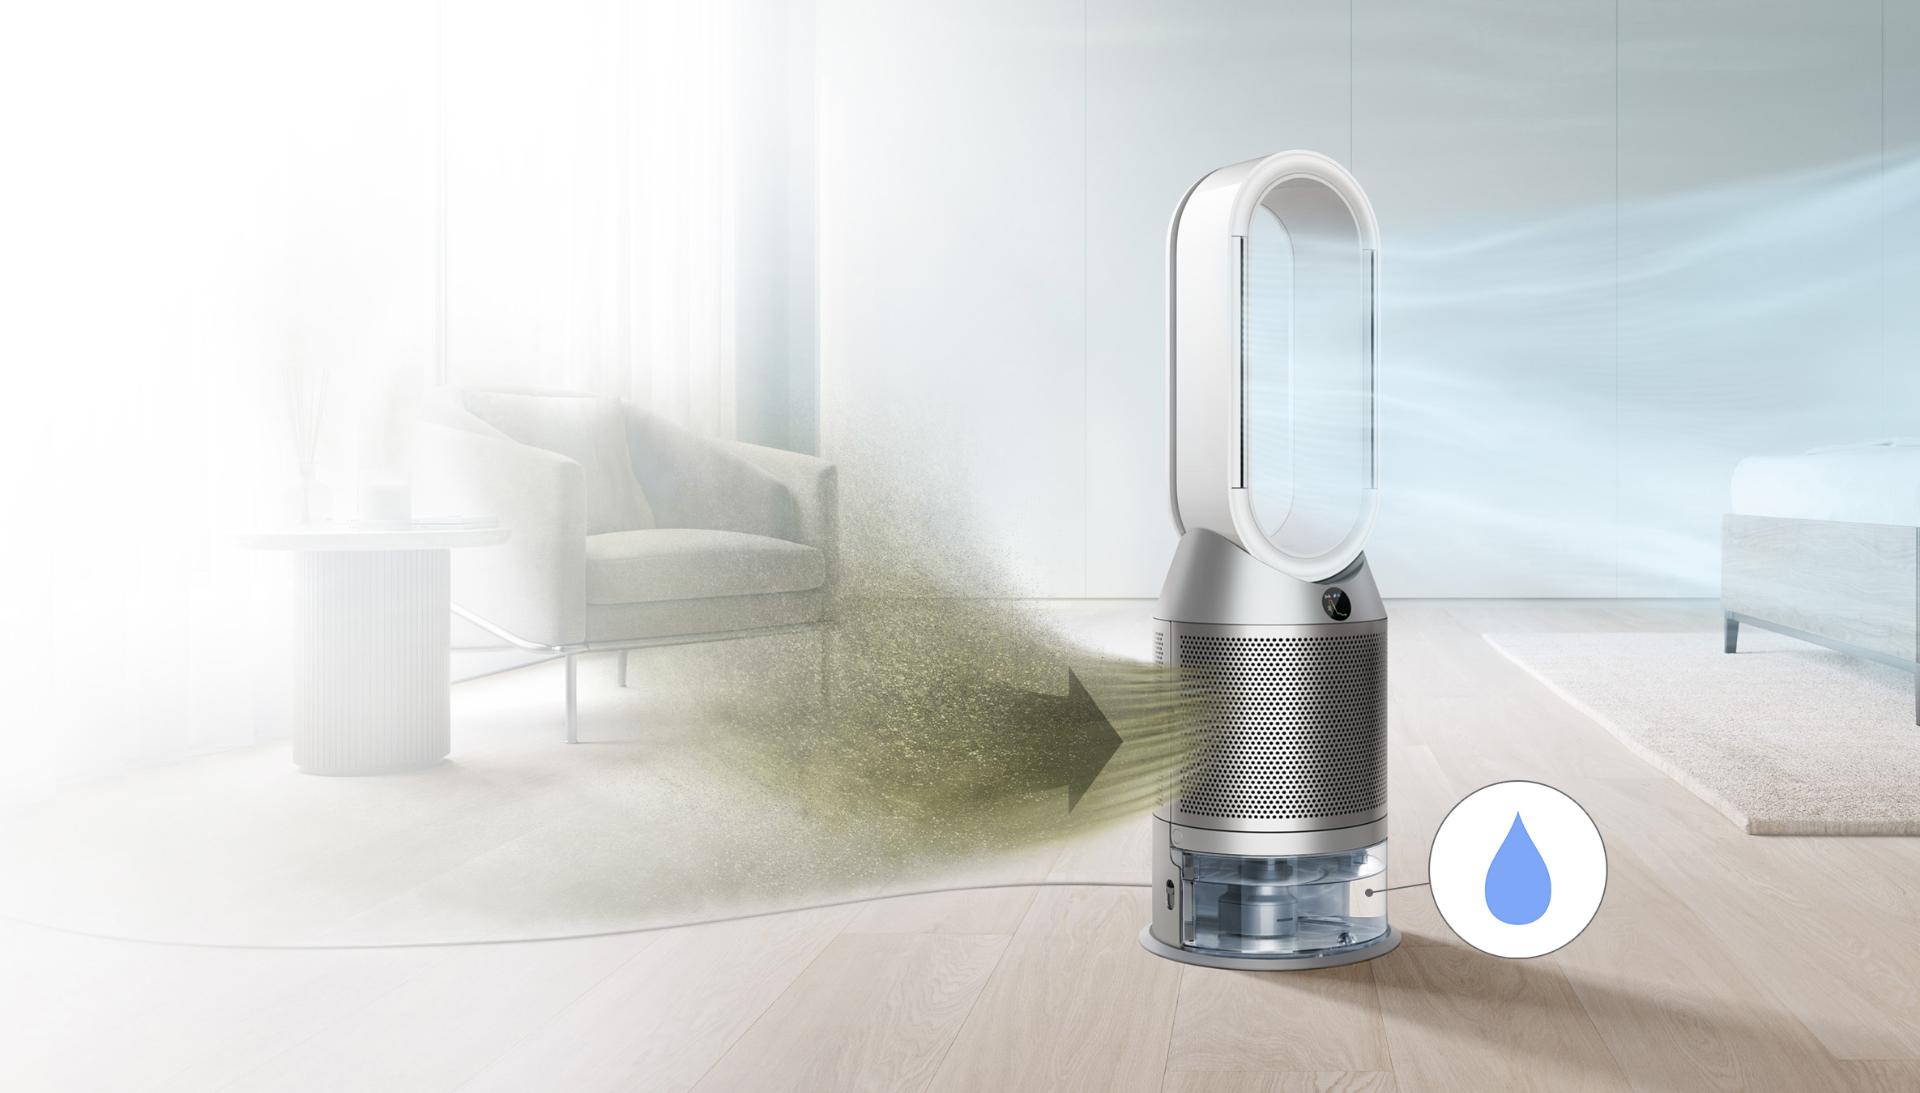 Dyson purifier humidifier in a living space, capturing pollutants and circulating purified air